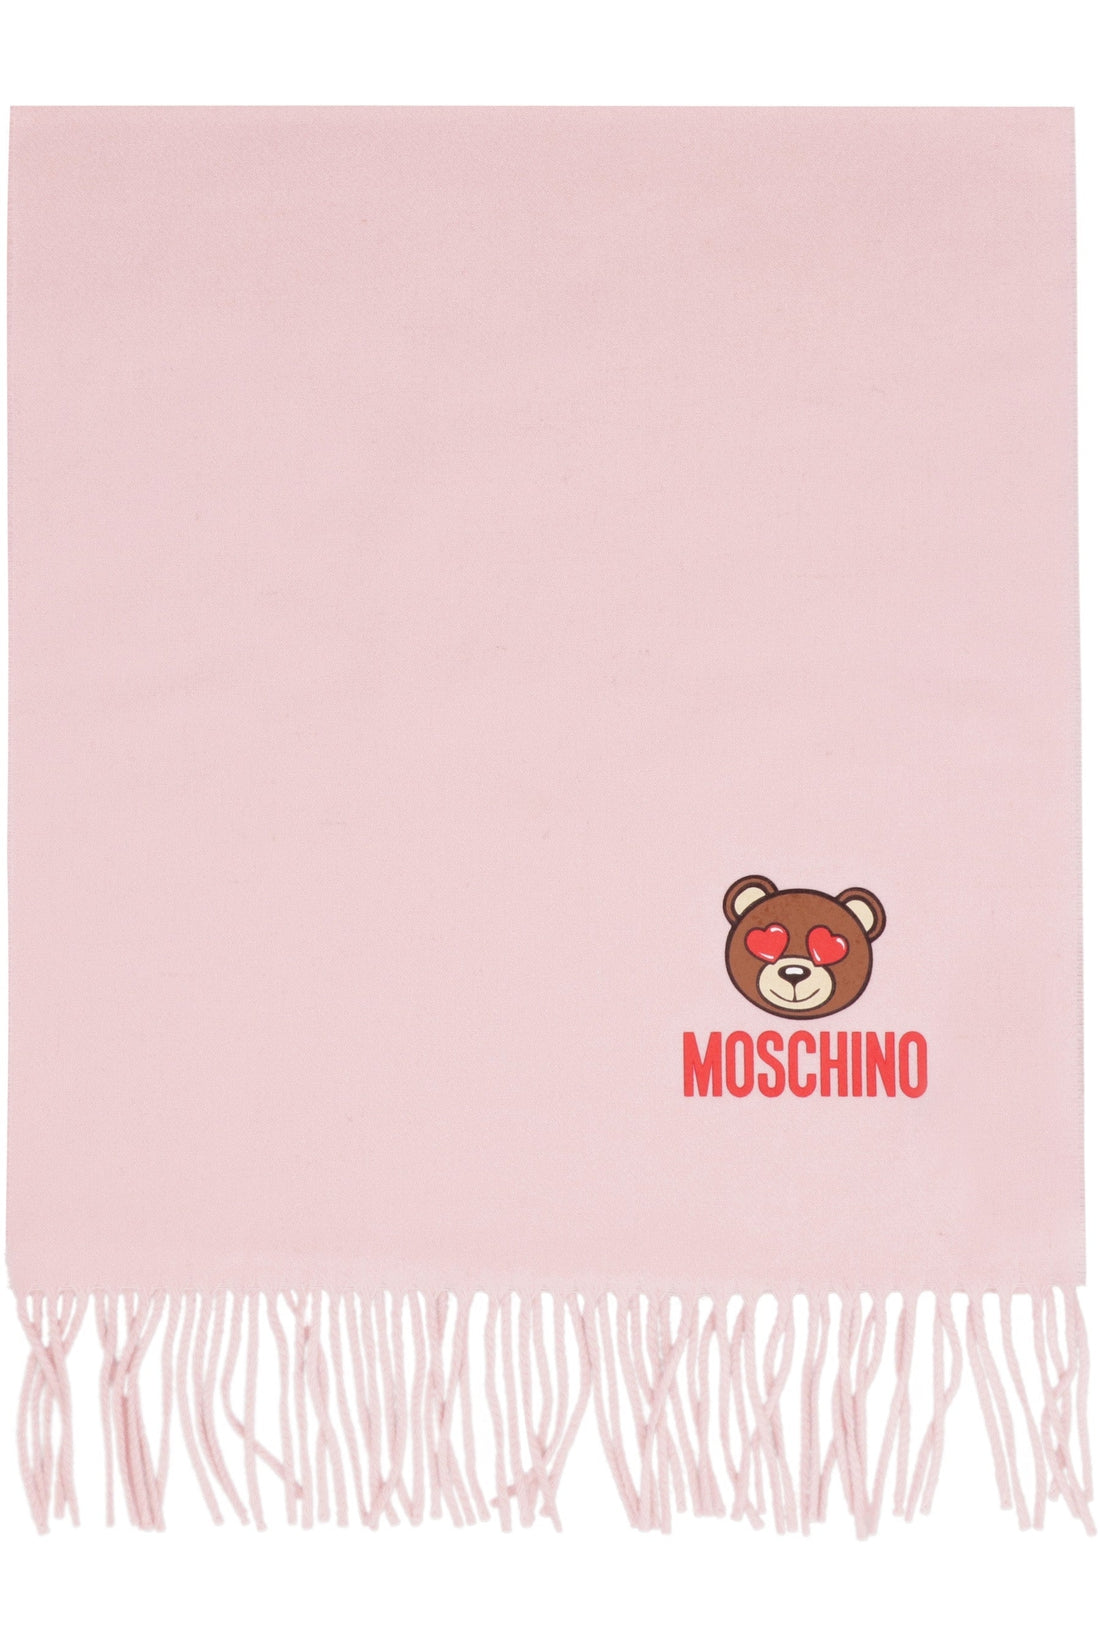 Moschino-OUTLET-SALE-Wool scarf with fringes-ARCHIVIST